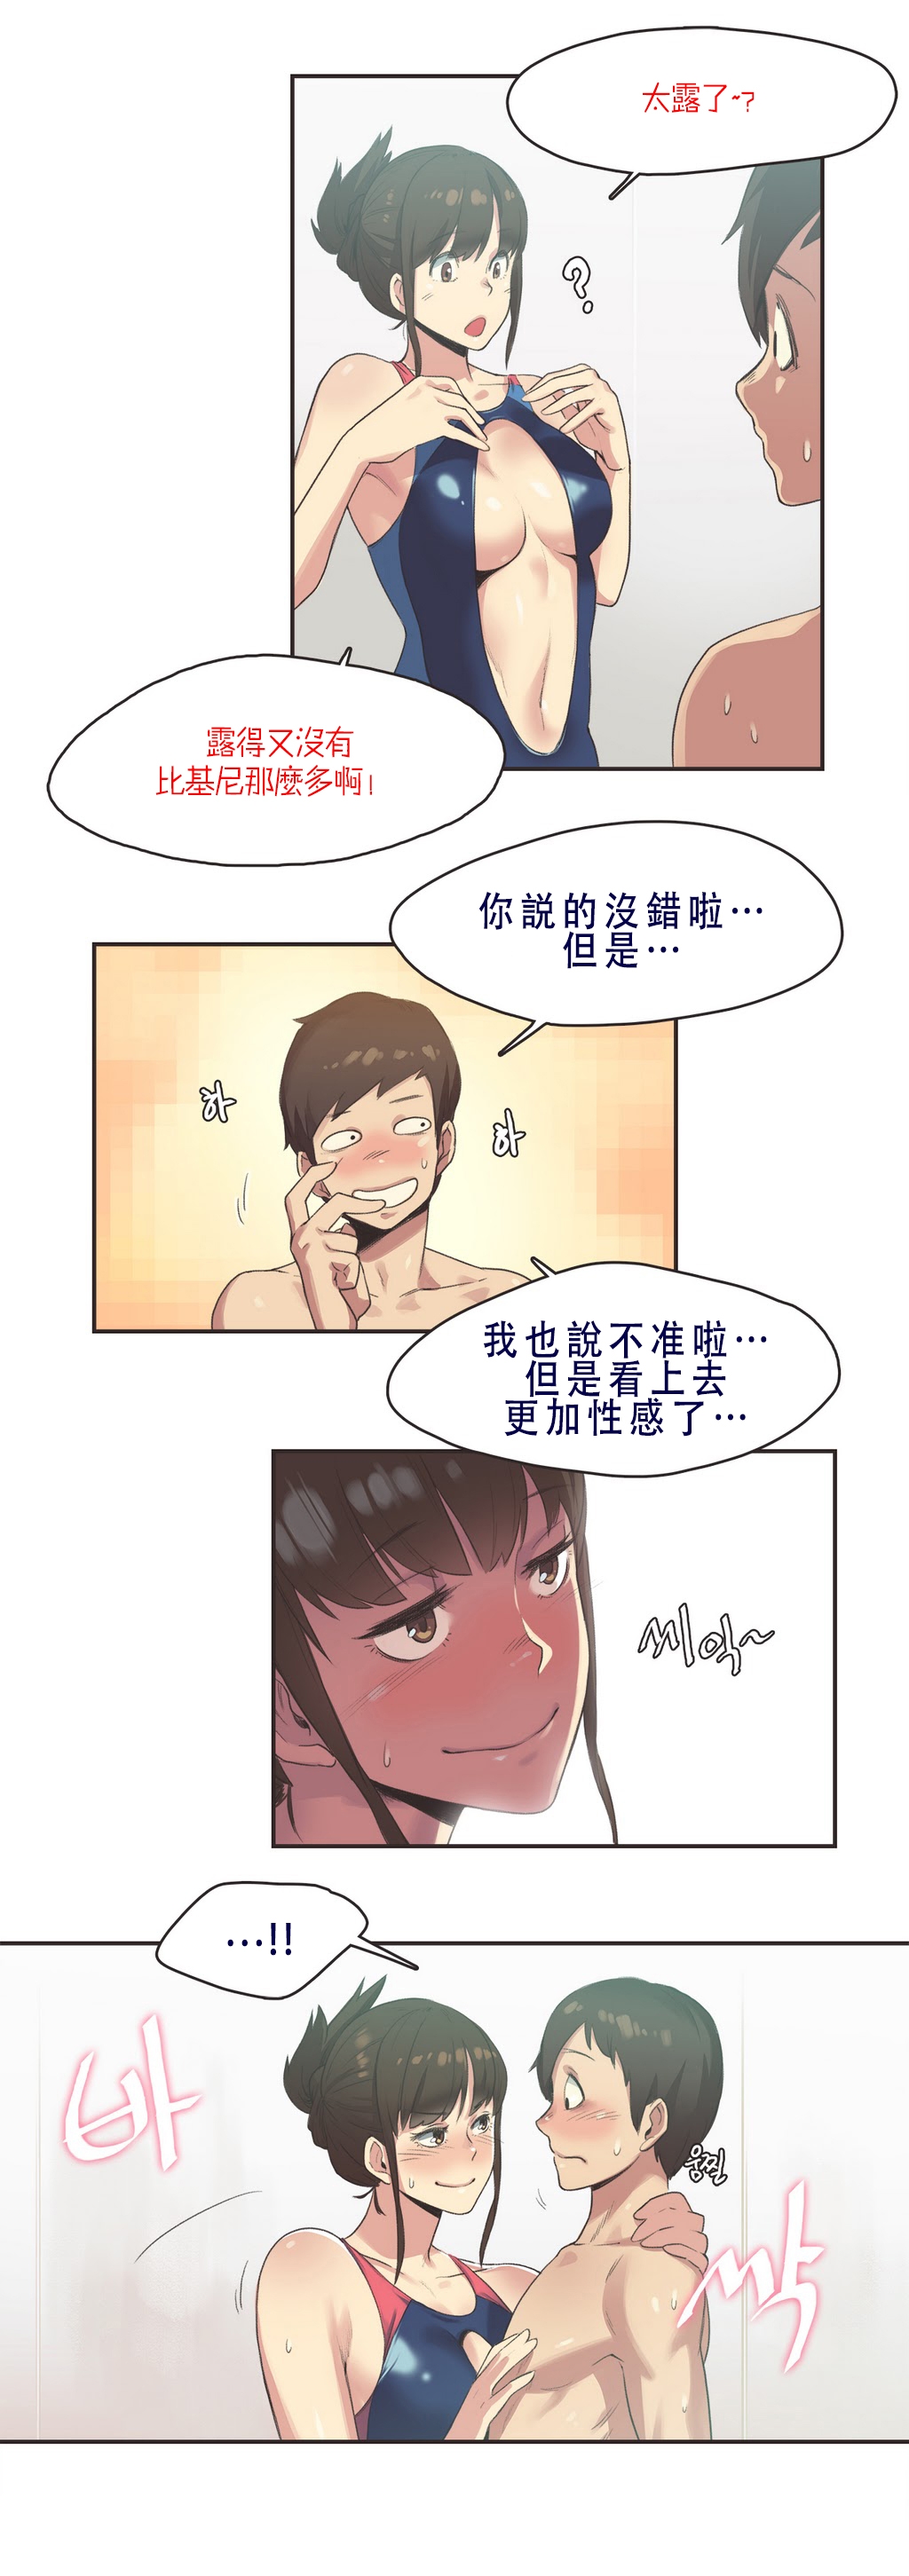 [Gamang] Sports Girl Ch.7 [Chinese] [高麗個人漢化] 2